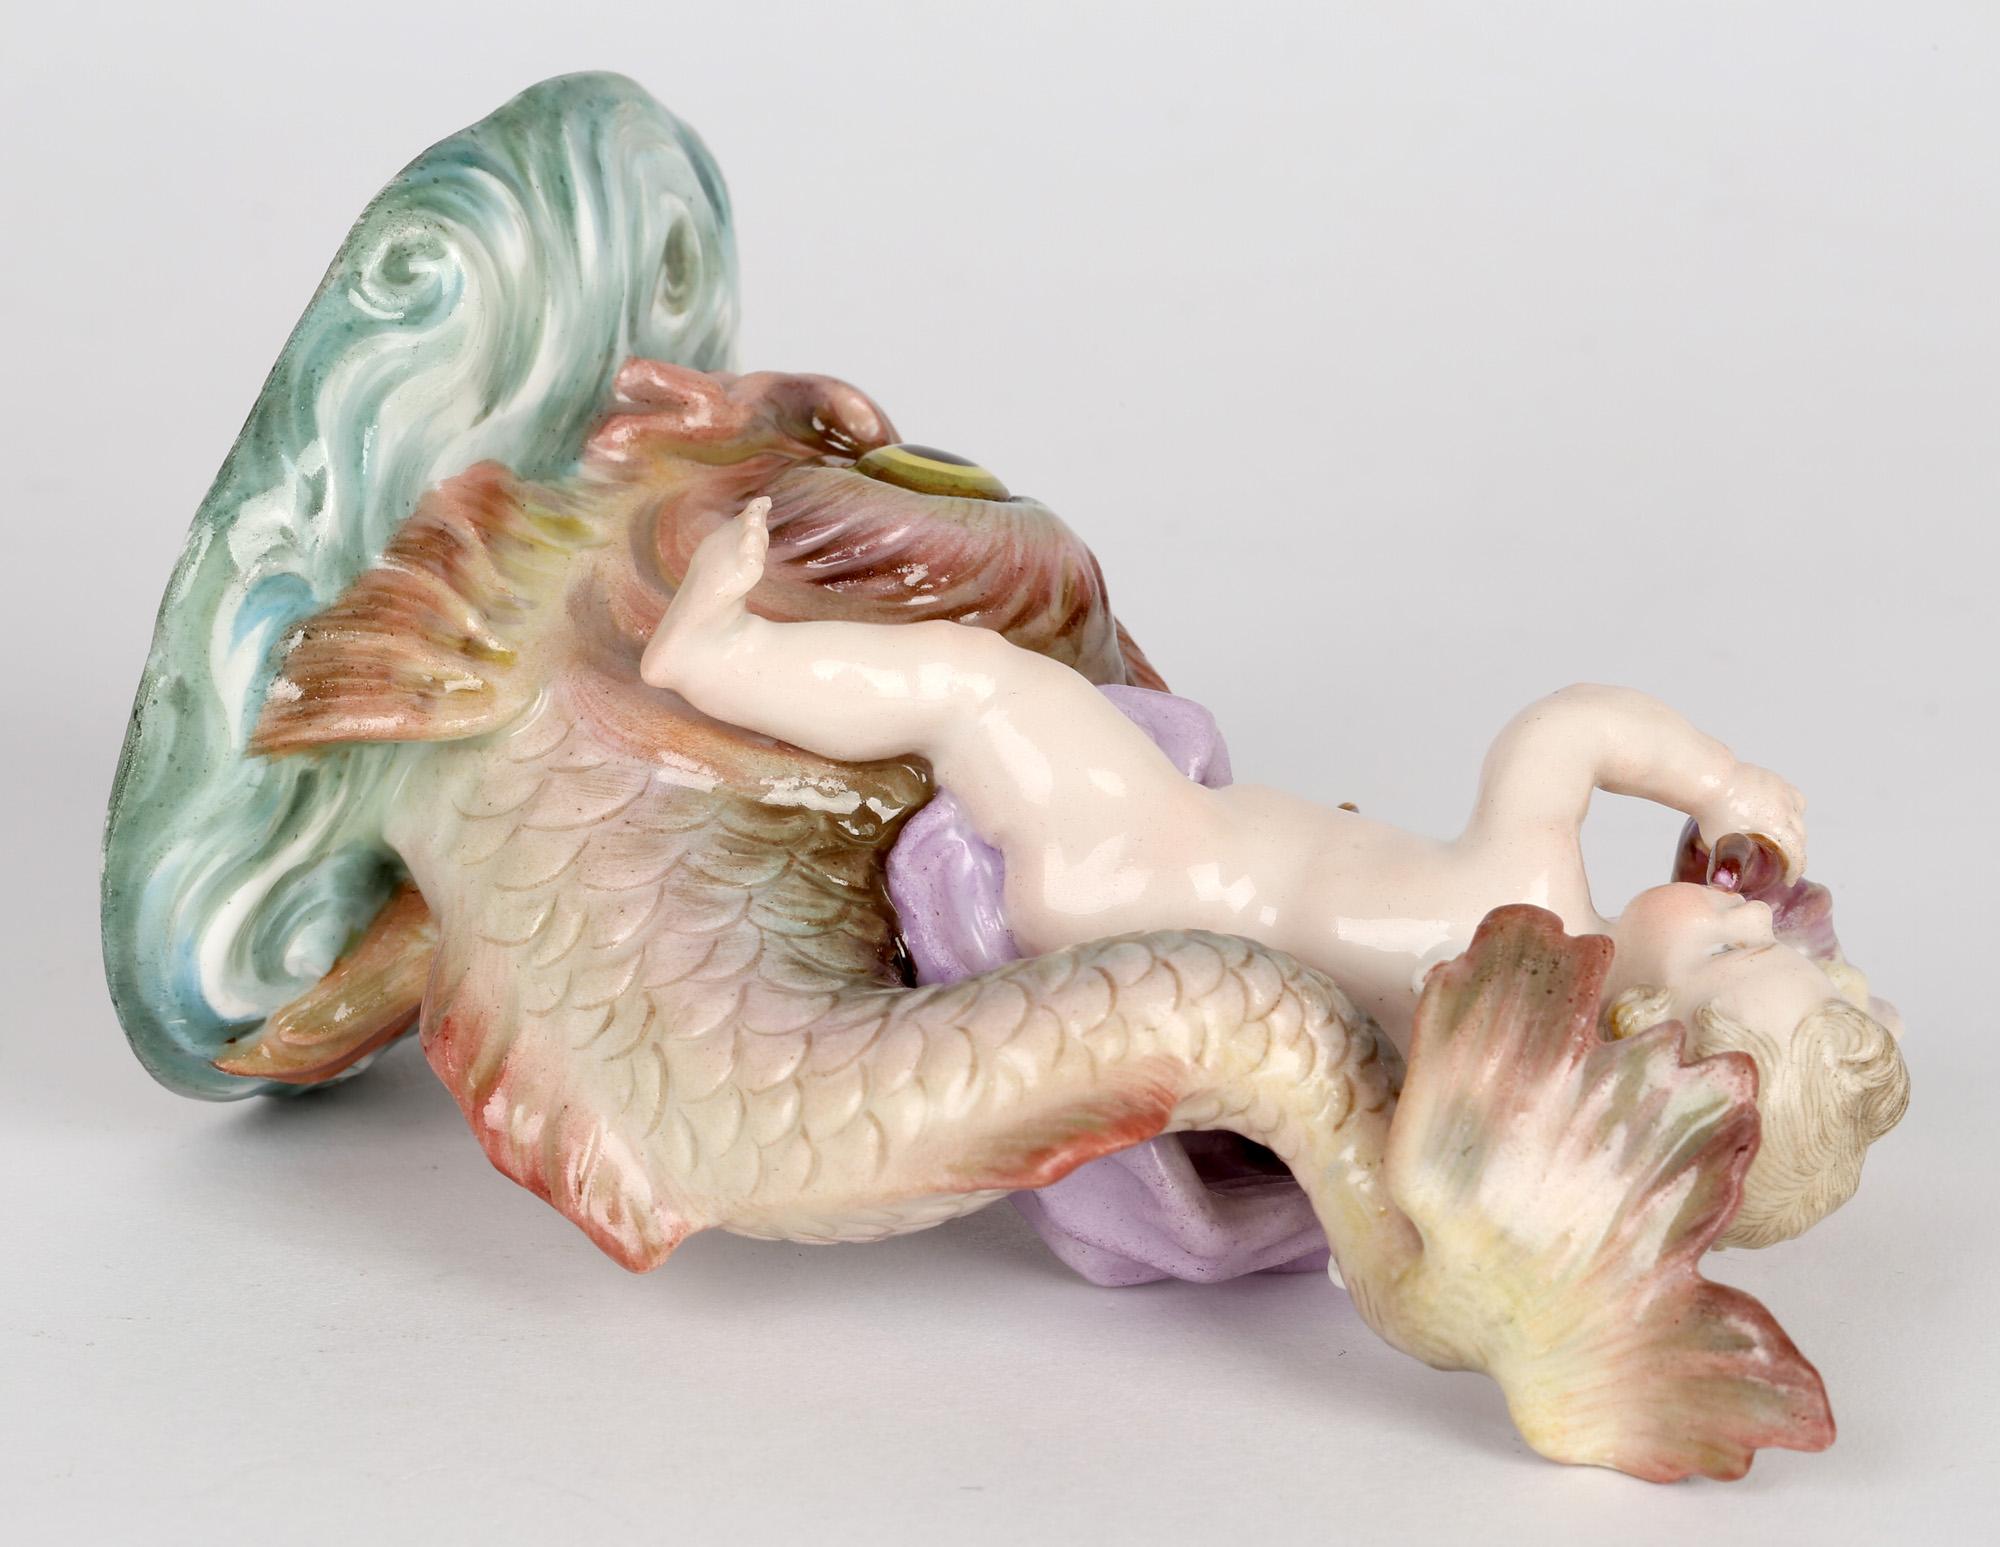 19th Century Meissen Porcelain Figure of a Cherub Playing a Horn Riding on a Large Fish